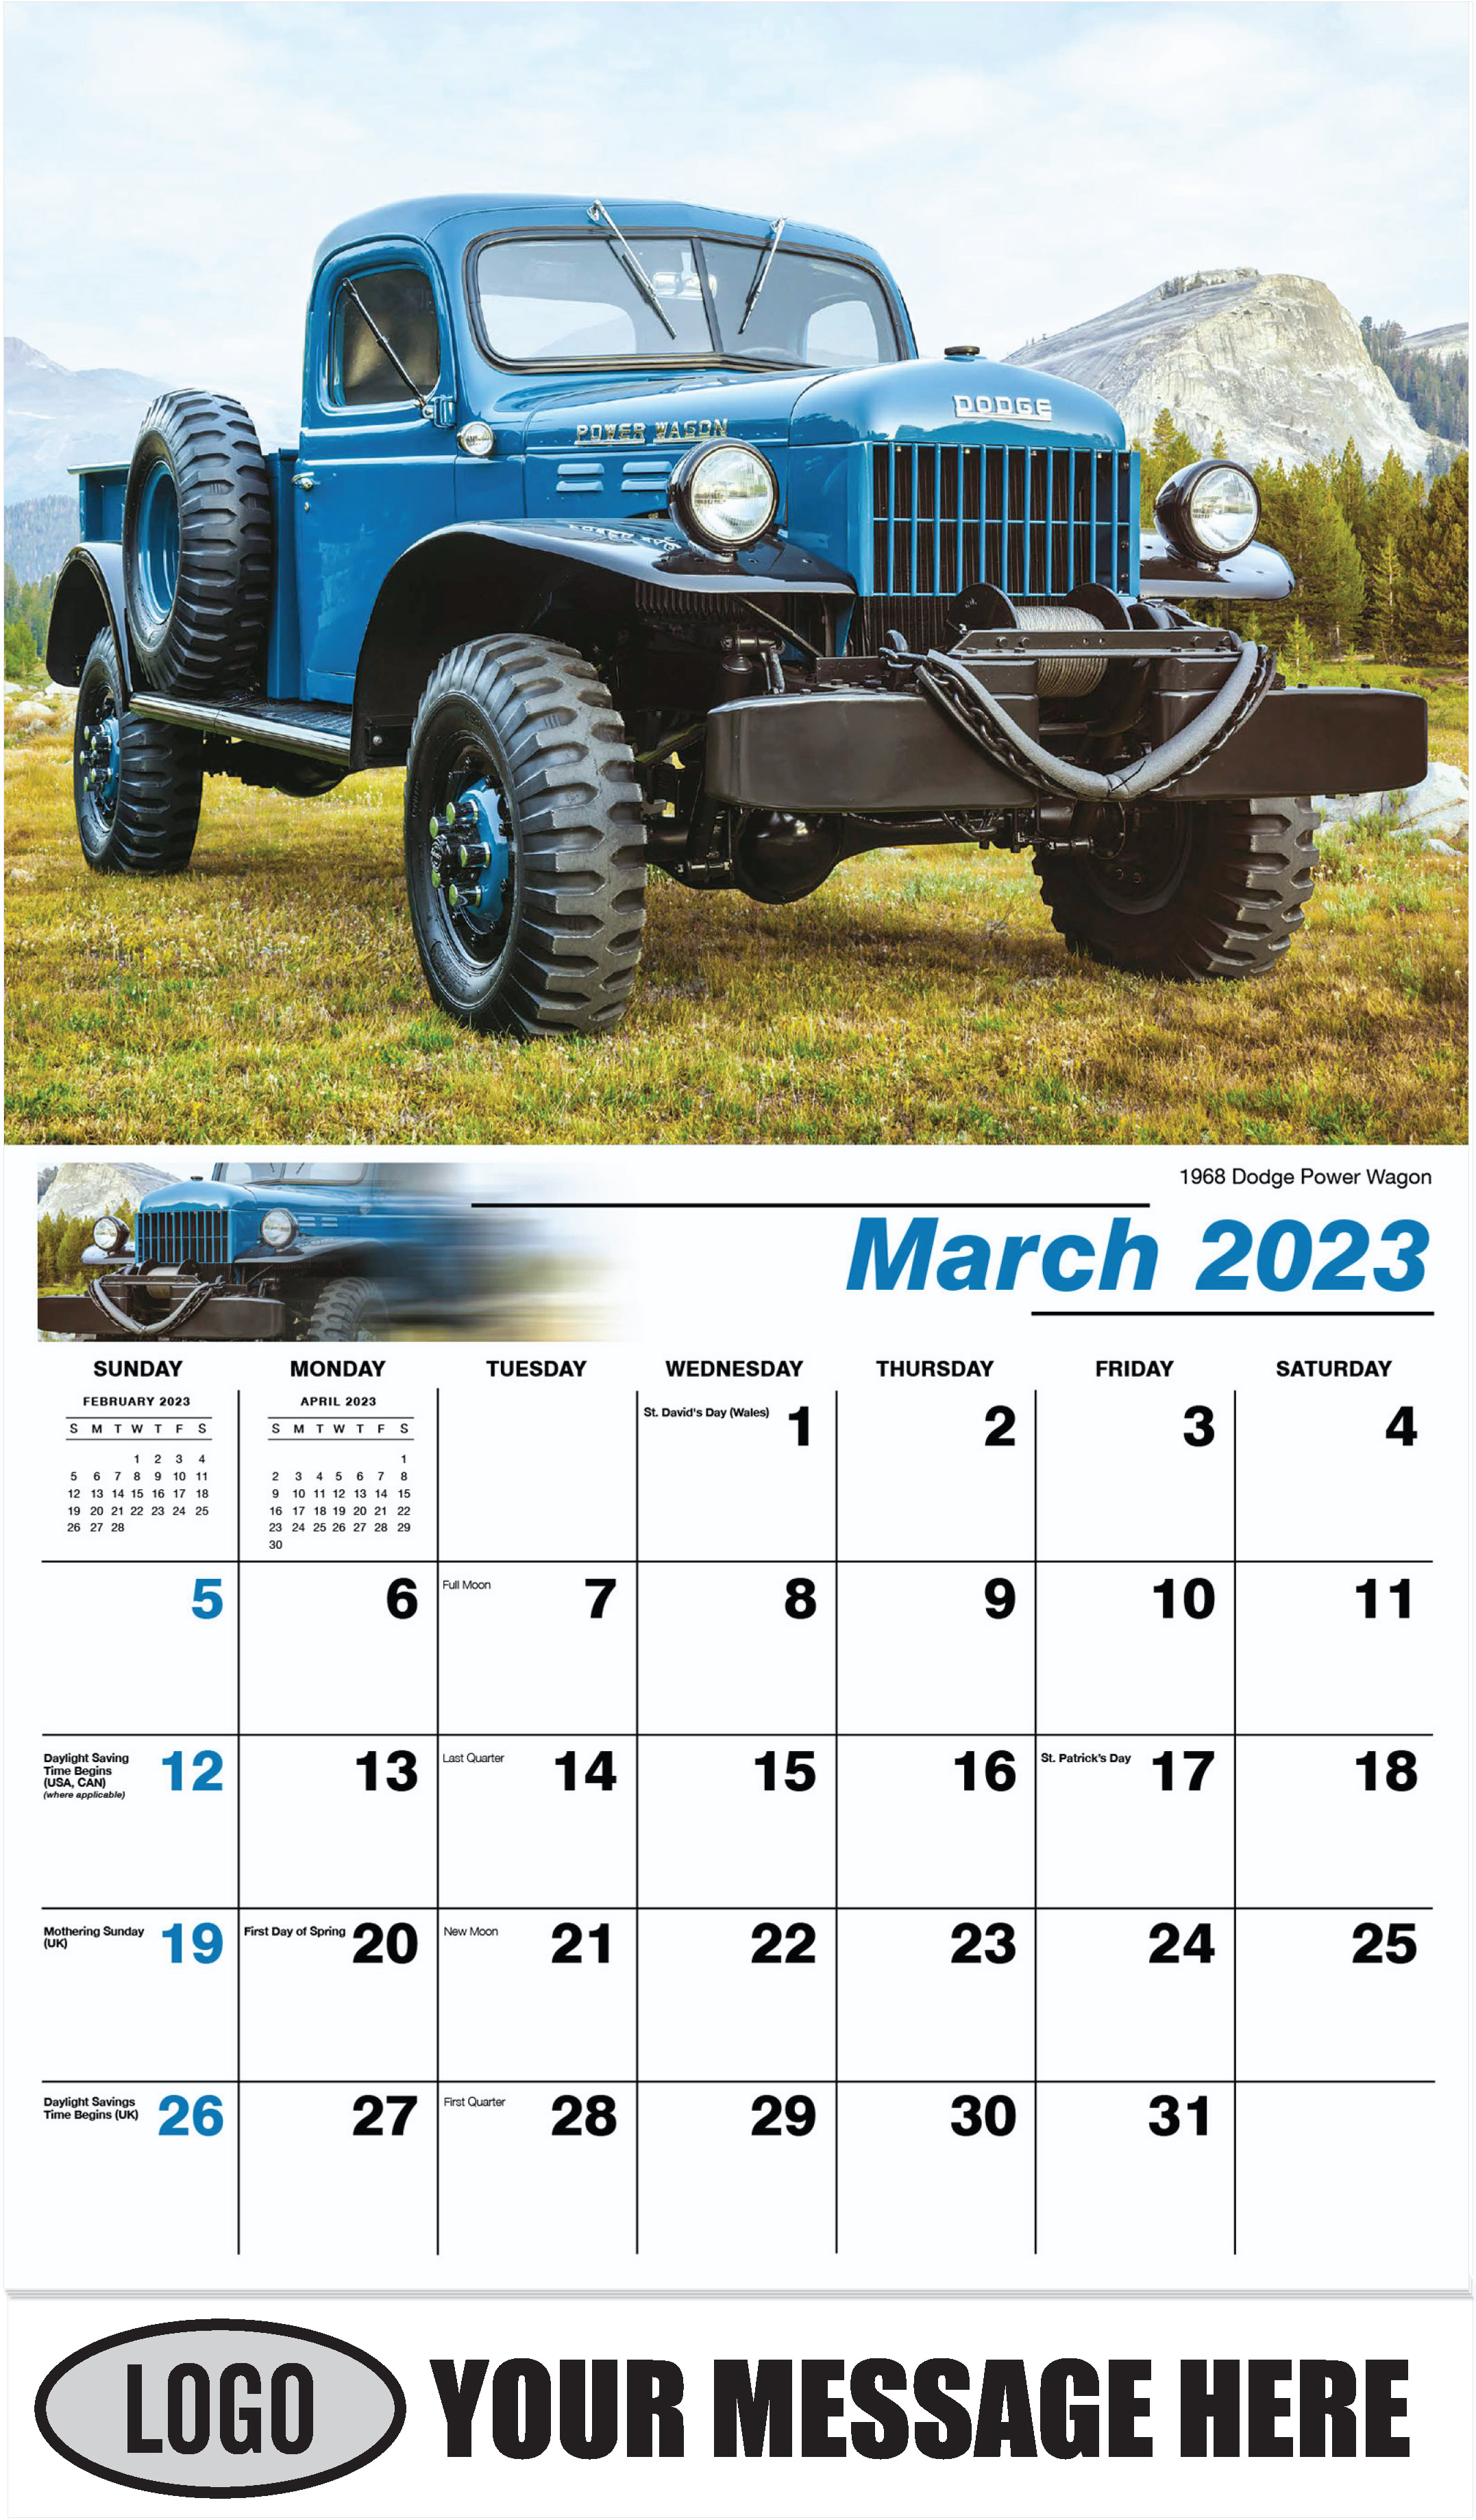 1968 Dodge Power Wagon - March - Pumped Up Pickups 2023 Promotional Calendar